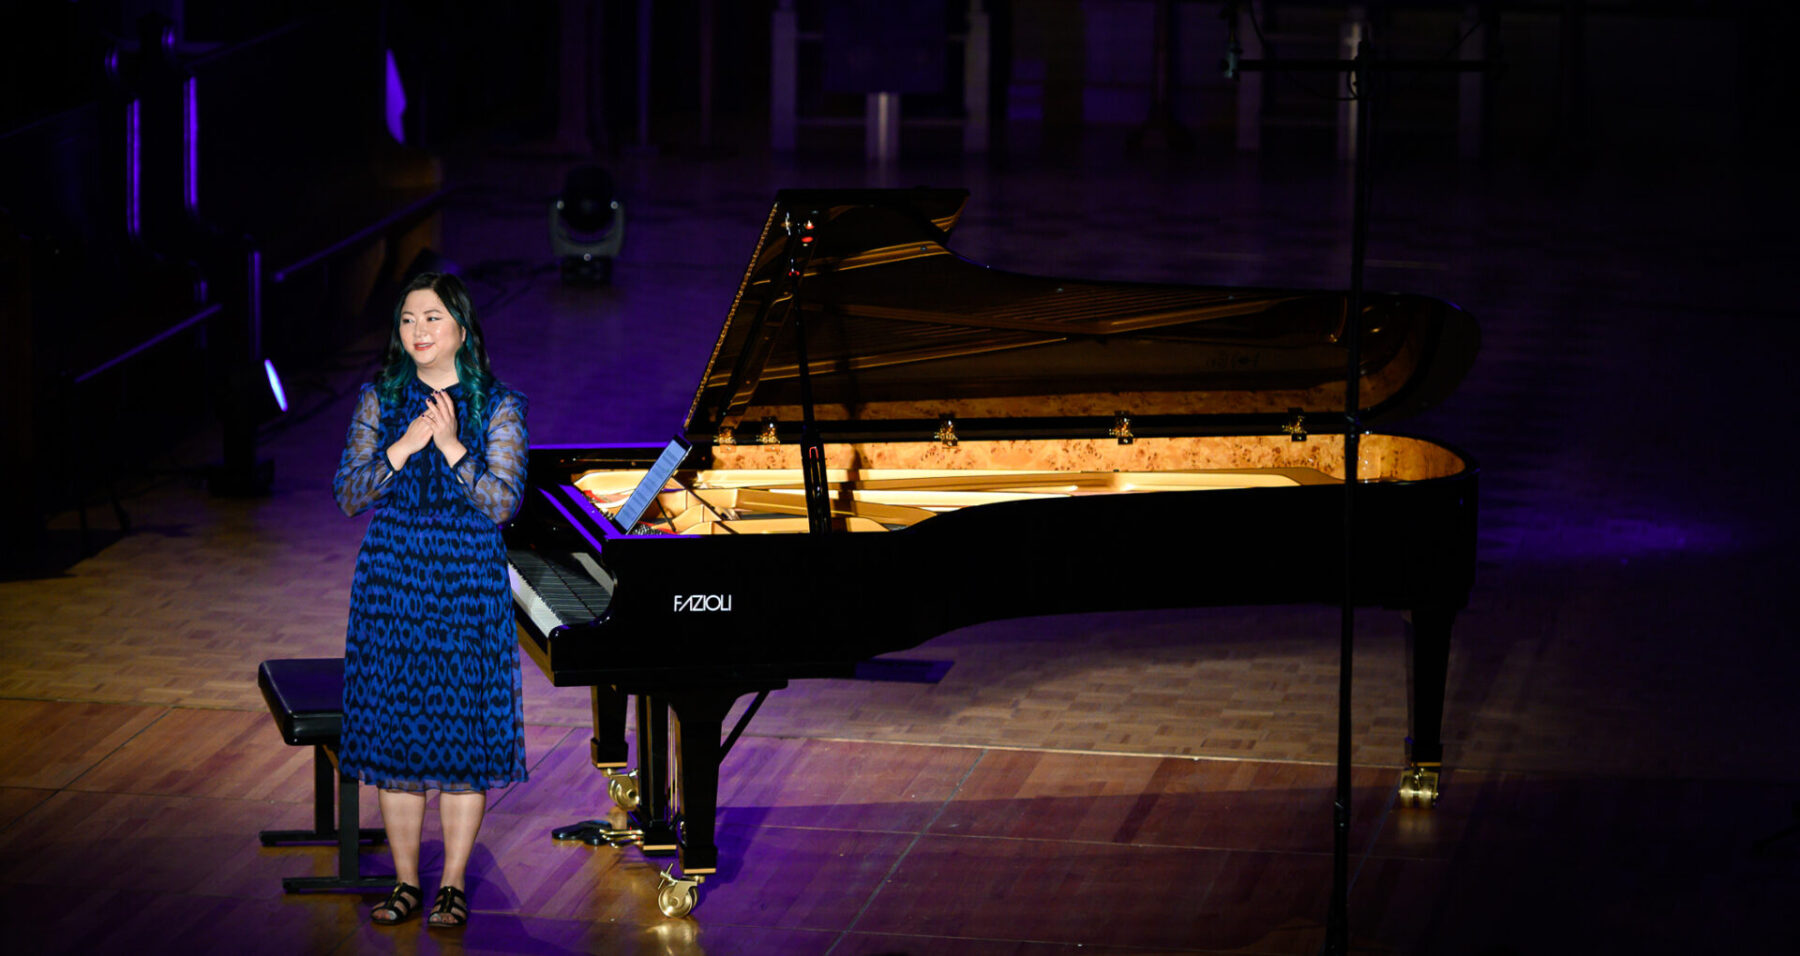 Vicky Chow in a blue and black dress in front of a Fazioli piano, talking to the audience